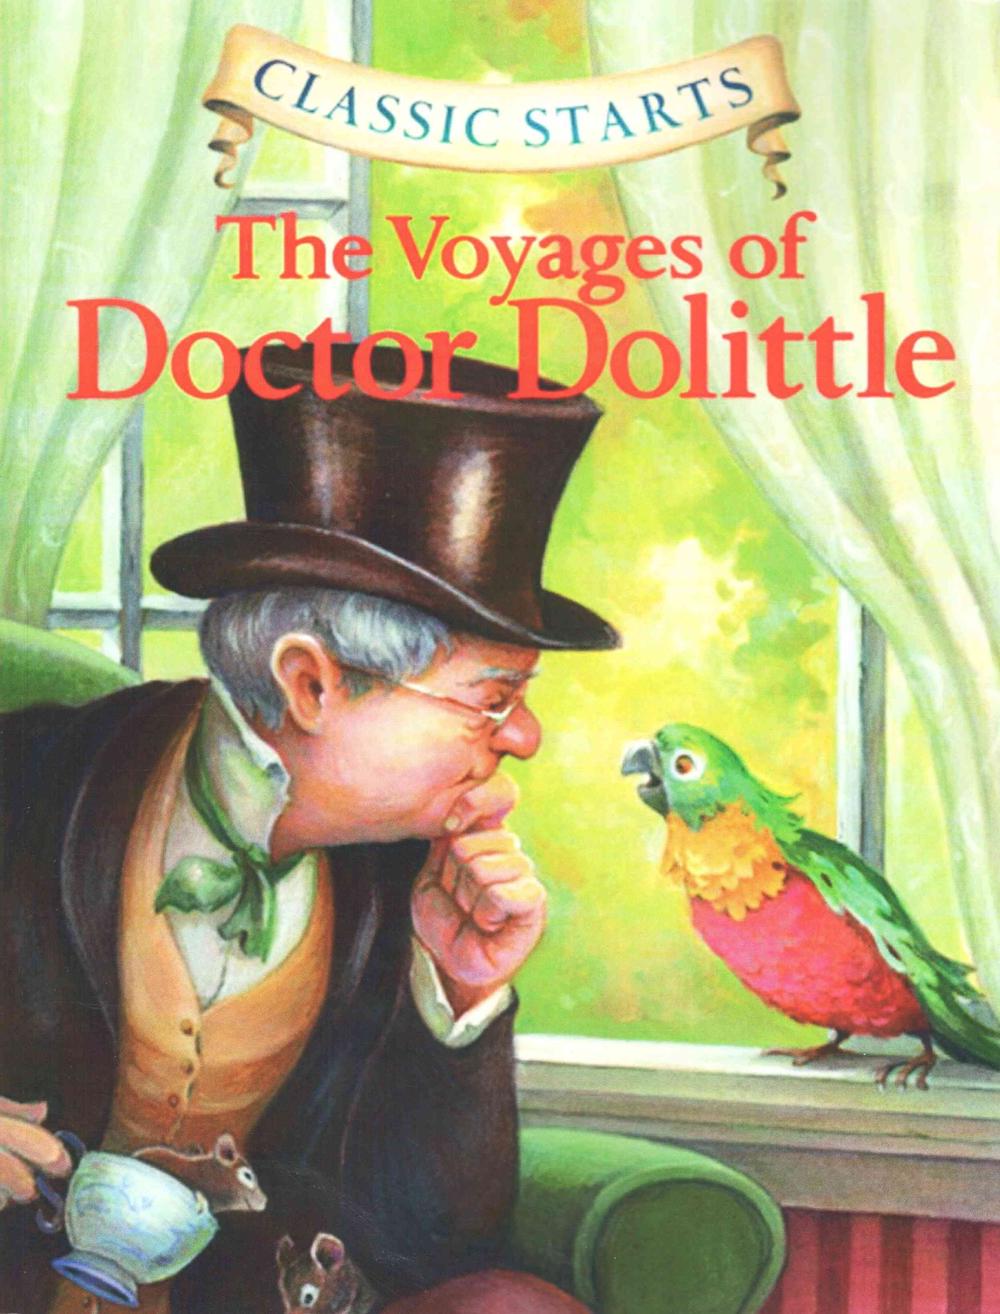 the voyage of doctor dolittle book